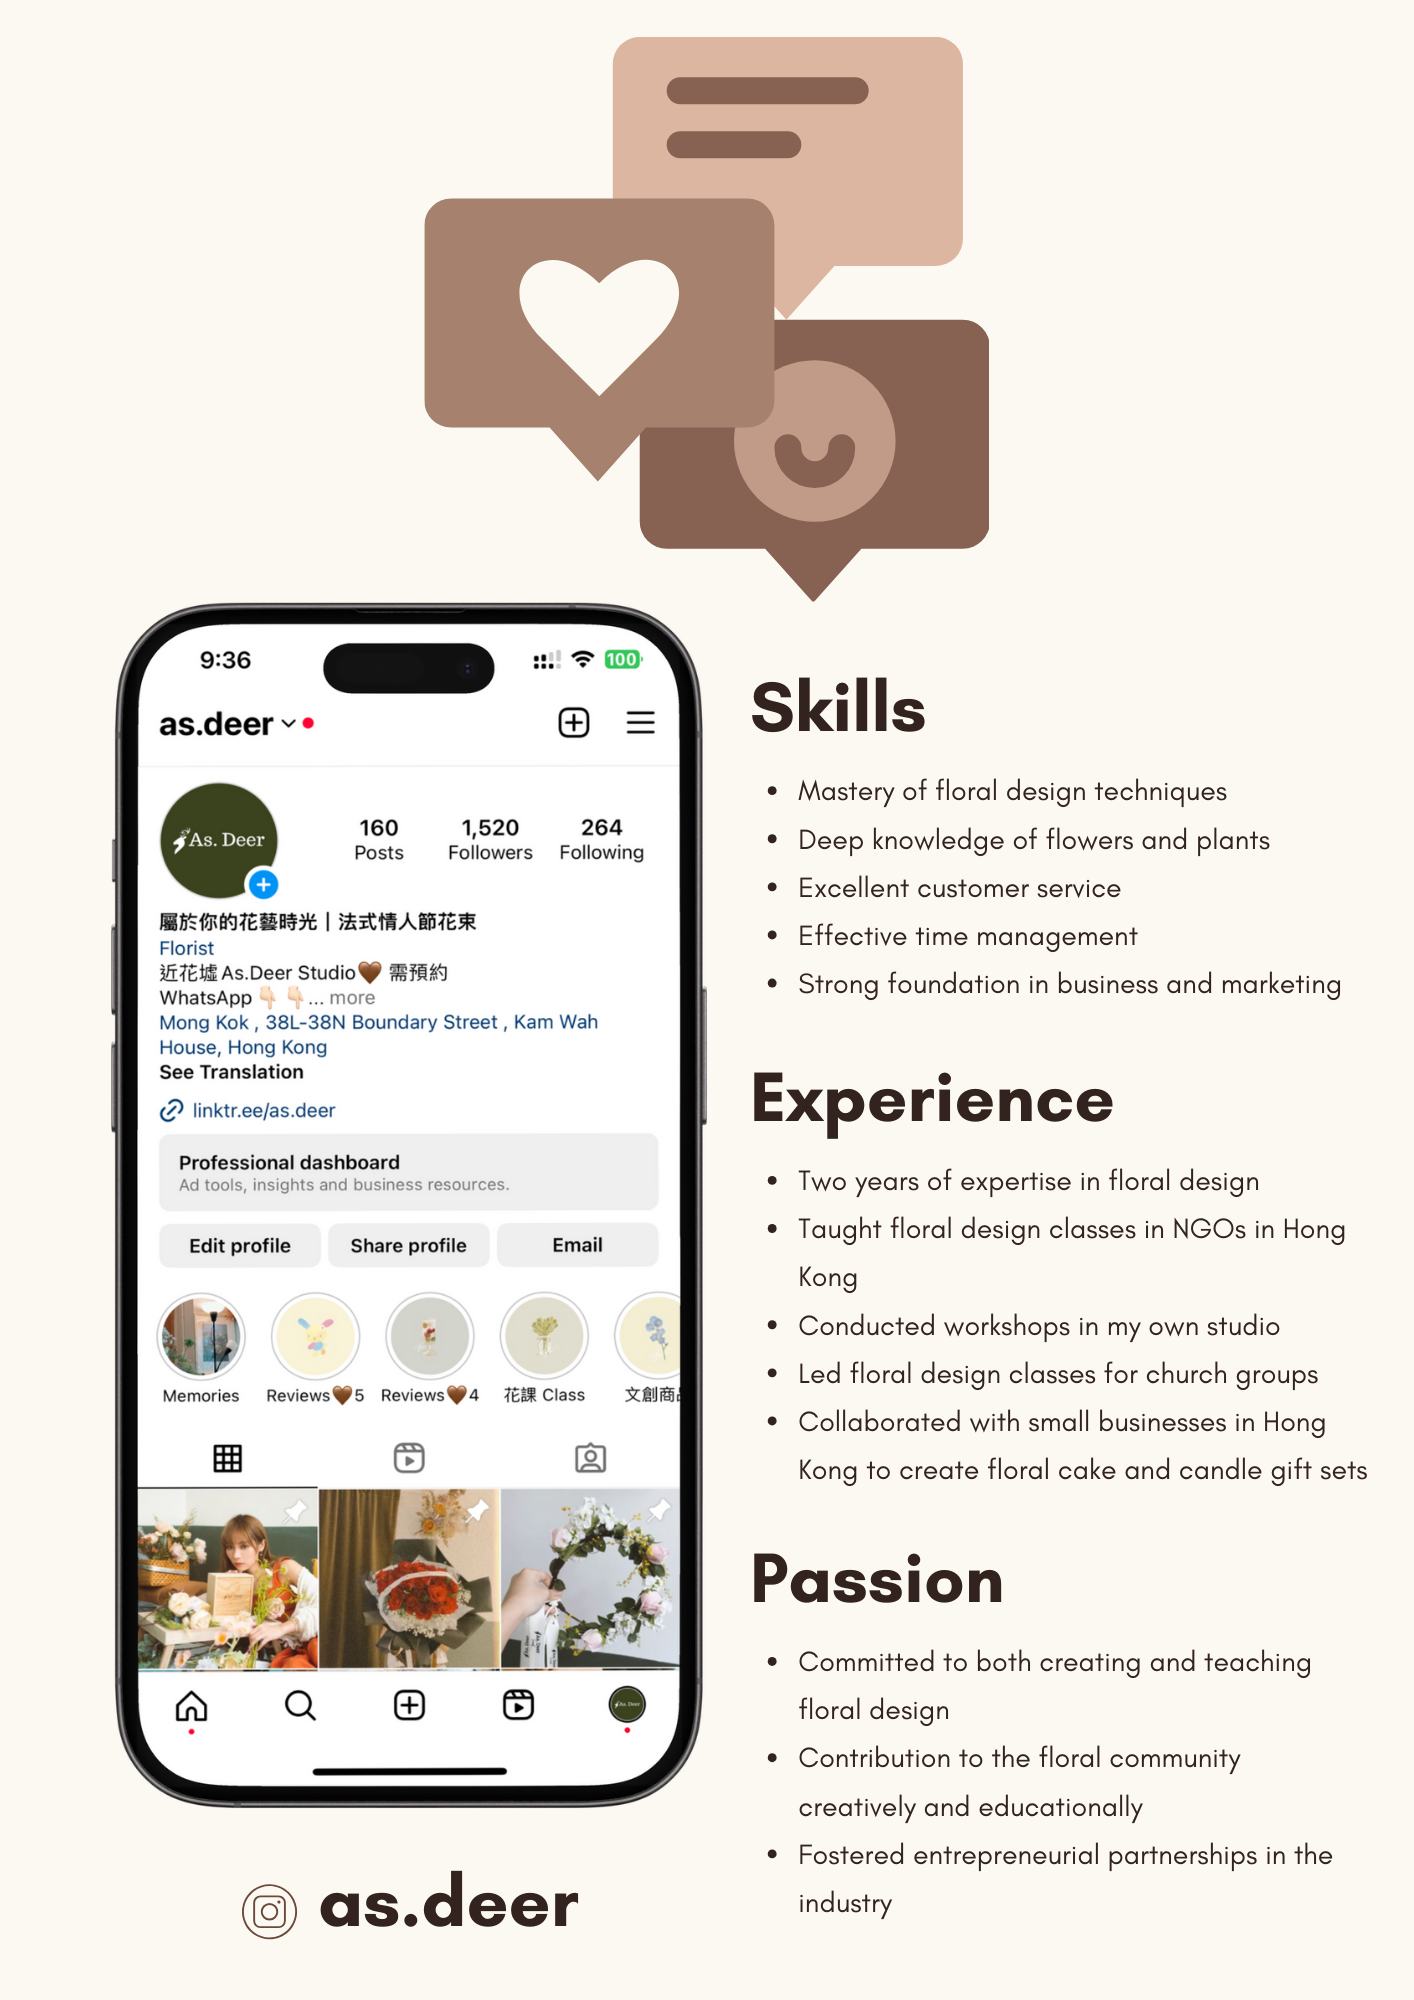 160
Posts

1,520

Followers

264
Following

(+]

BE ROTEREEK | EXWABIER

Florist

i IE18 As.Deer Studio §@ BIL)

WhatsApp more

Mong Kok , 38L-38N Boundary Street , Kam Wah
House, Hong Kong

See Translation

(2 linktr.eefas deer

Professional dashboard
h

      
 

   

  

ts and t

   

usin

 

  

Edit profile

®-~0E

Reviews @5 Reviews@a EIR Class

 

Share profile

       

Memories pe LL}

   

© as.deer

Skills

¢ Mastery of floral design techniques

* Deep knowledge of flowers and plants
* Excellent customer service

* Effective time management

* Strong foundation in business and marketing

Experience

¢ Two years of expertise in floral design

¢ Taught floral design classes in NGOs in Hong
Kong

* Conducted workshops in my own studio

* Led floral design classes for church groups

* Collaborated with small businesses in Hong

Kong to create floral cake and candle gift sets

Passion

* Committed to both creating and teaching
floral design

¢ Contribution to the floral community
creatively and educationally

* Fostered entrepreneurial partnerships in the

industry